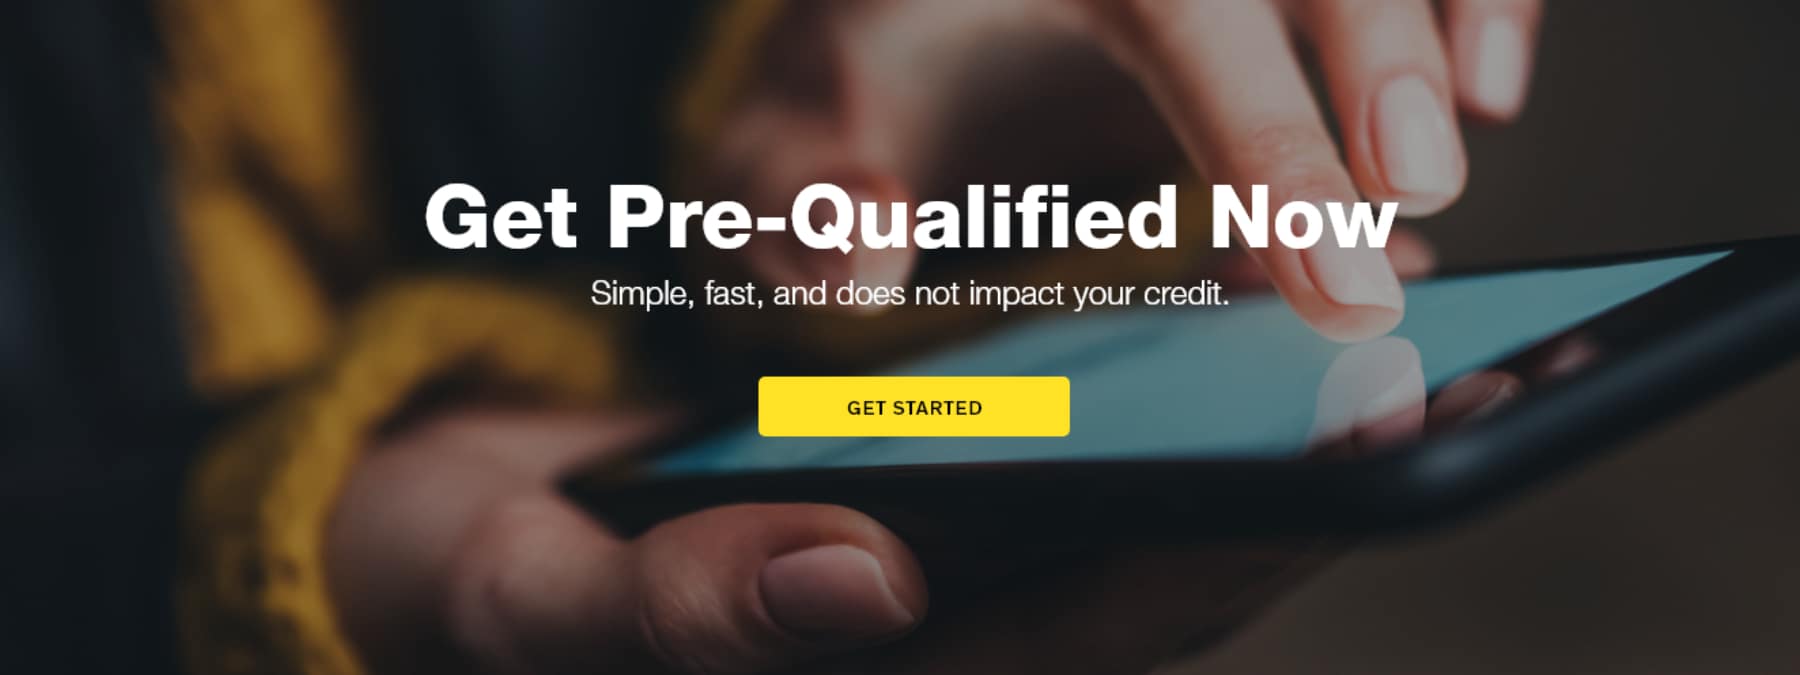 Get Pre-Qualified Now